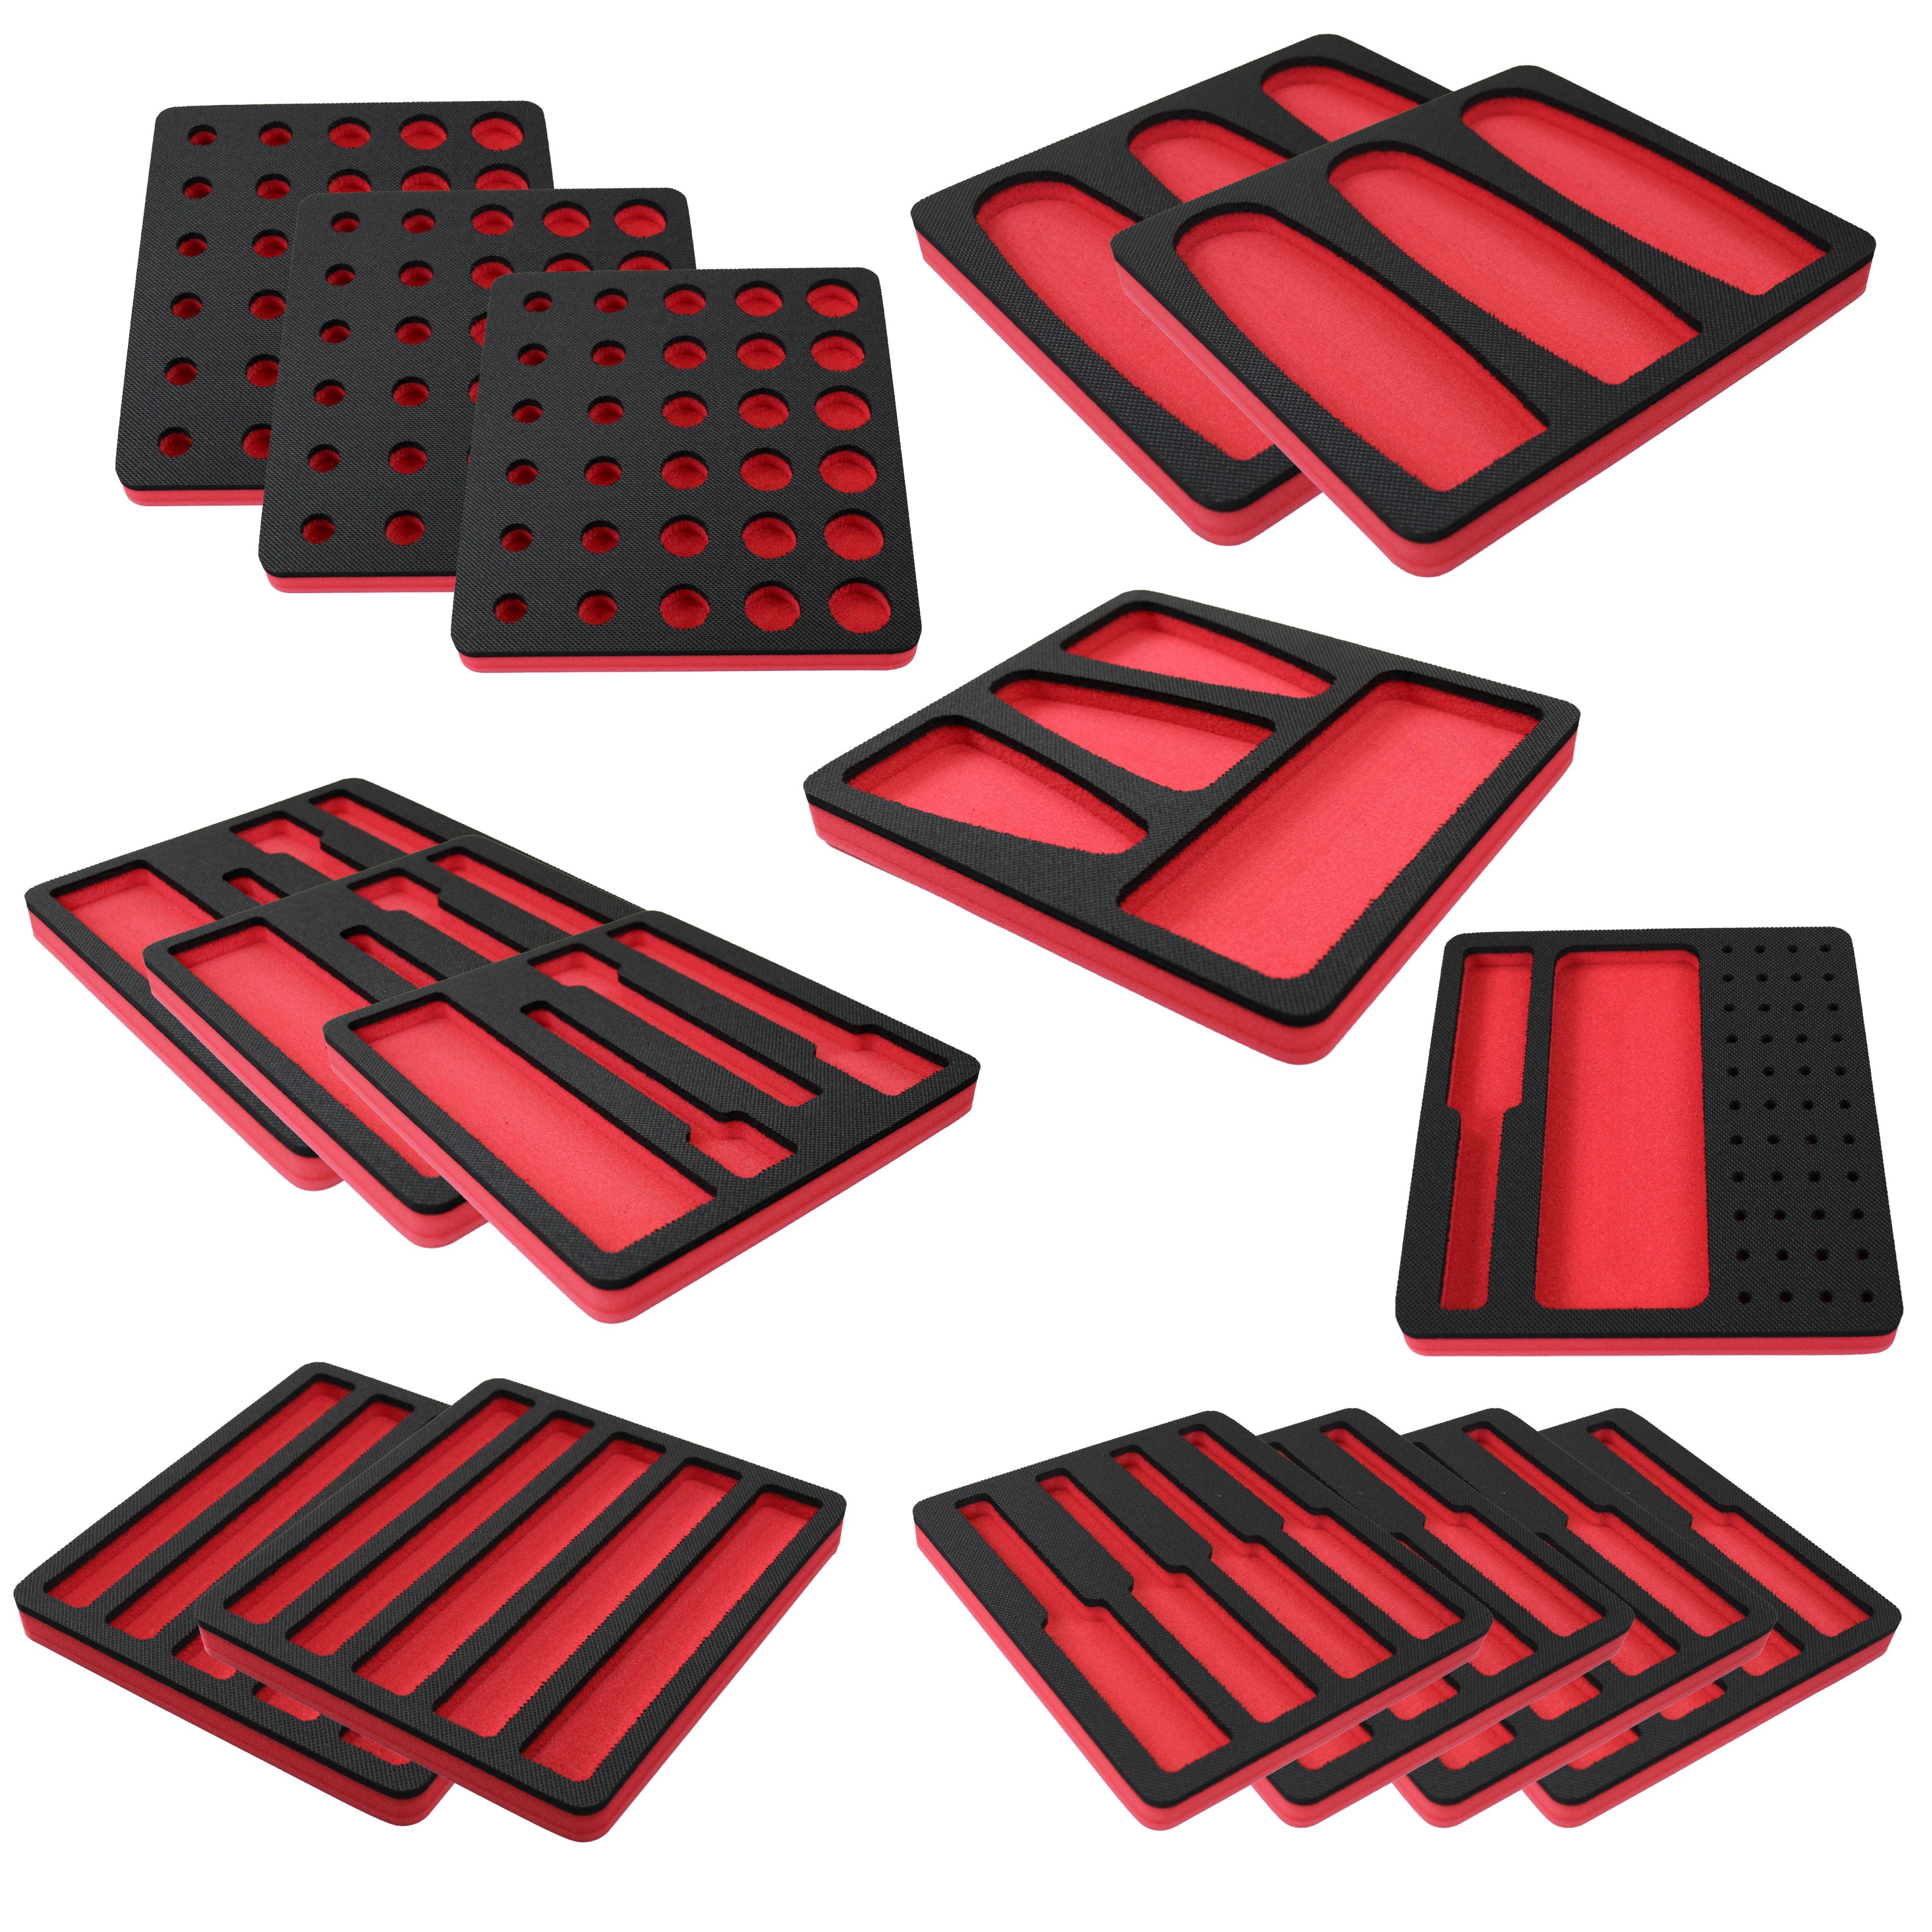 Tool Drawer Organizer 16-Piece Insert Set Red and Black Durable Foam Holds Many Tools and Accessories 10 x 11 Inch Trays Fits Craftsman Husky Kobalt Milwaukee Many Others